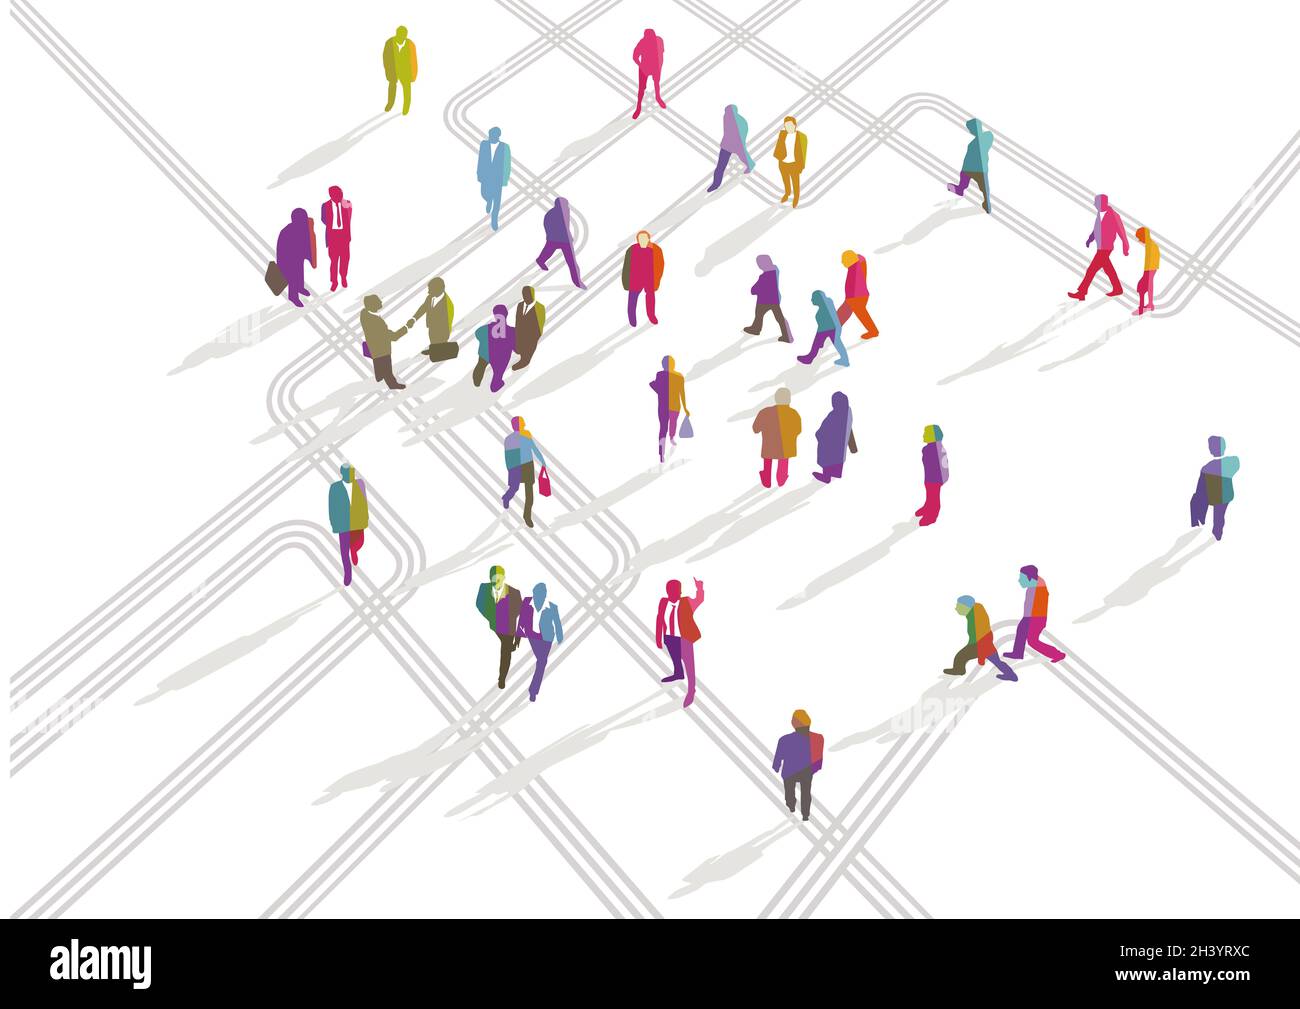 Group of people in different directions illustration Stock Photo